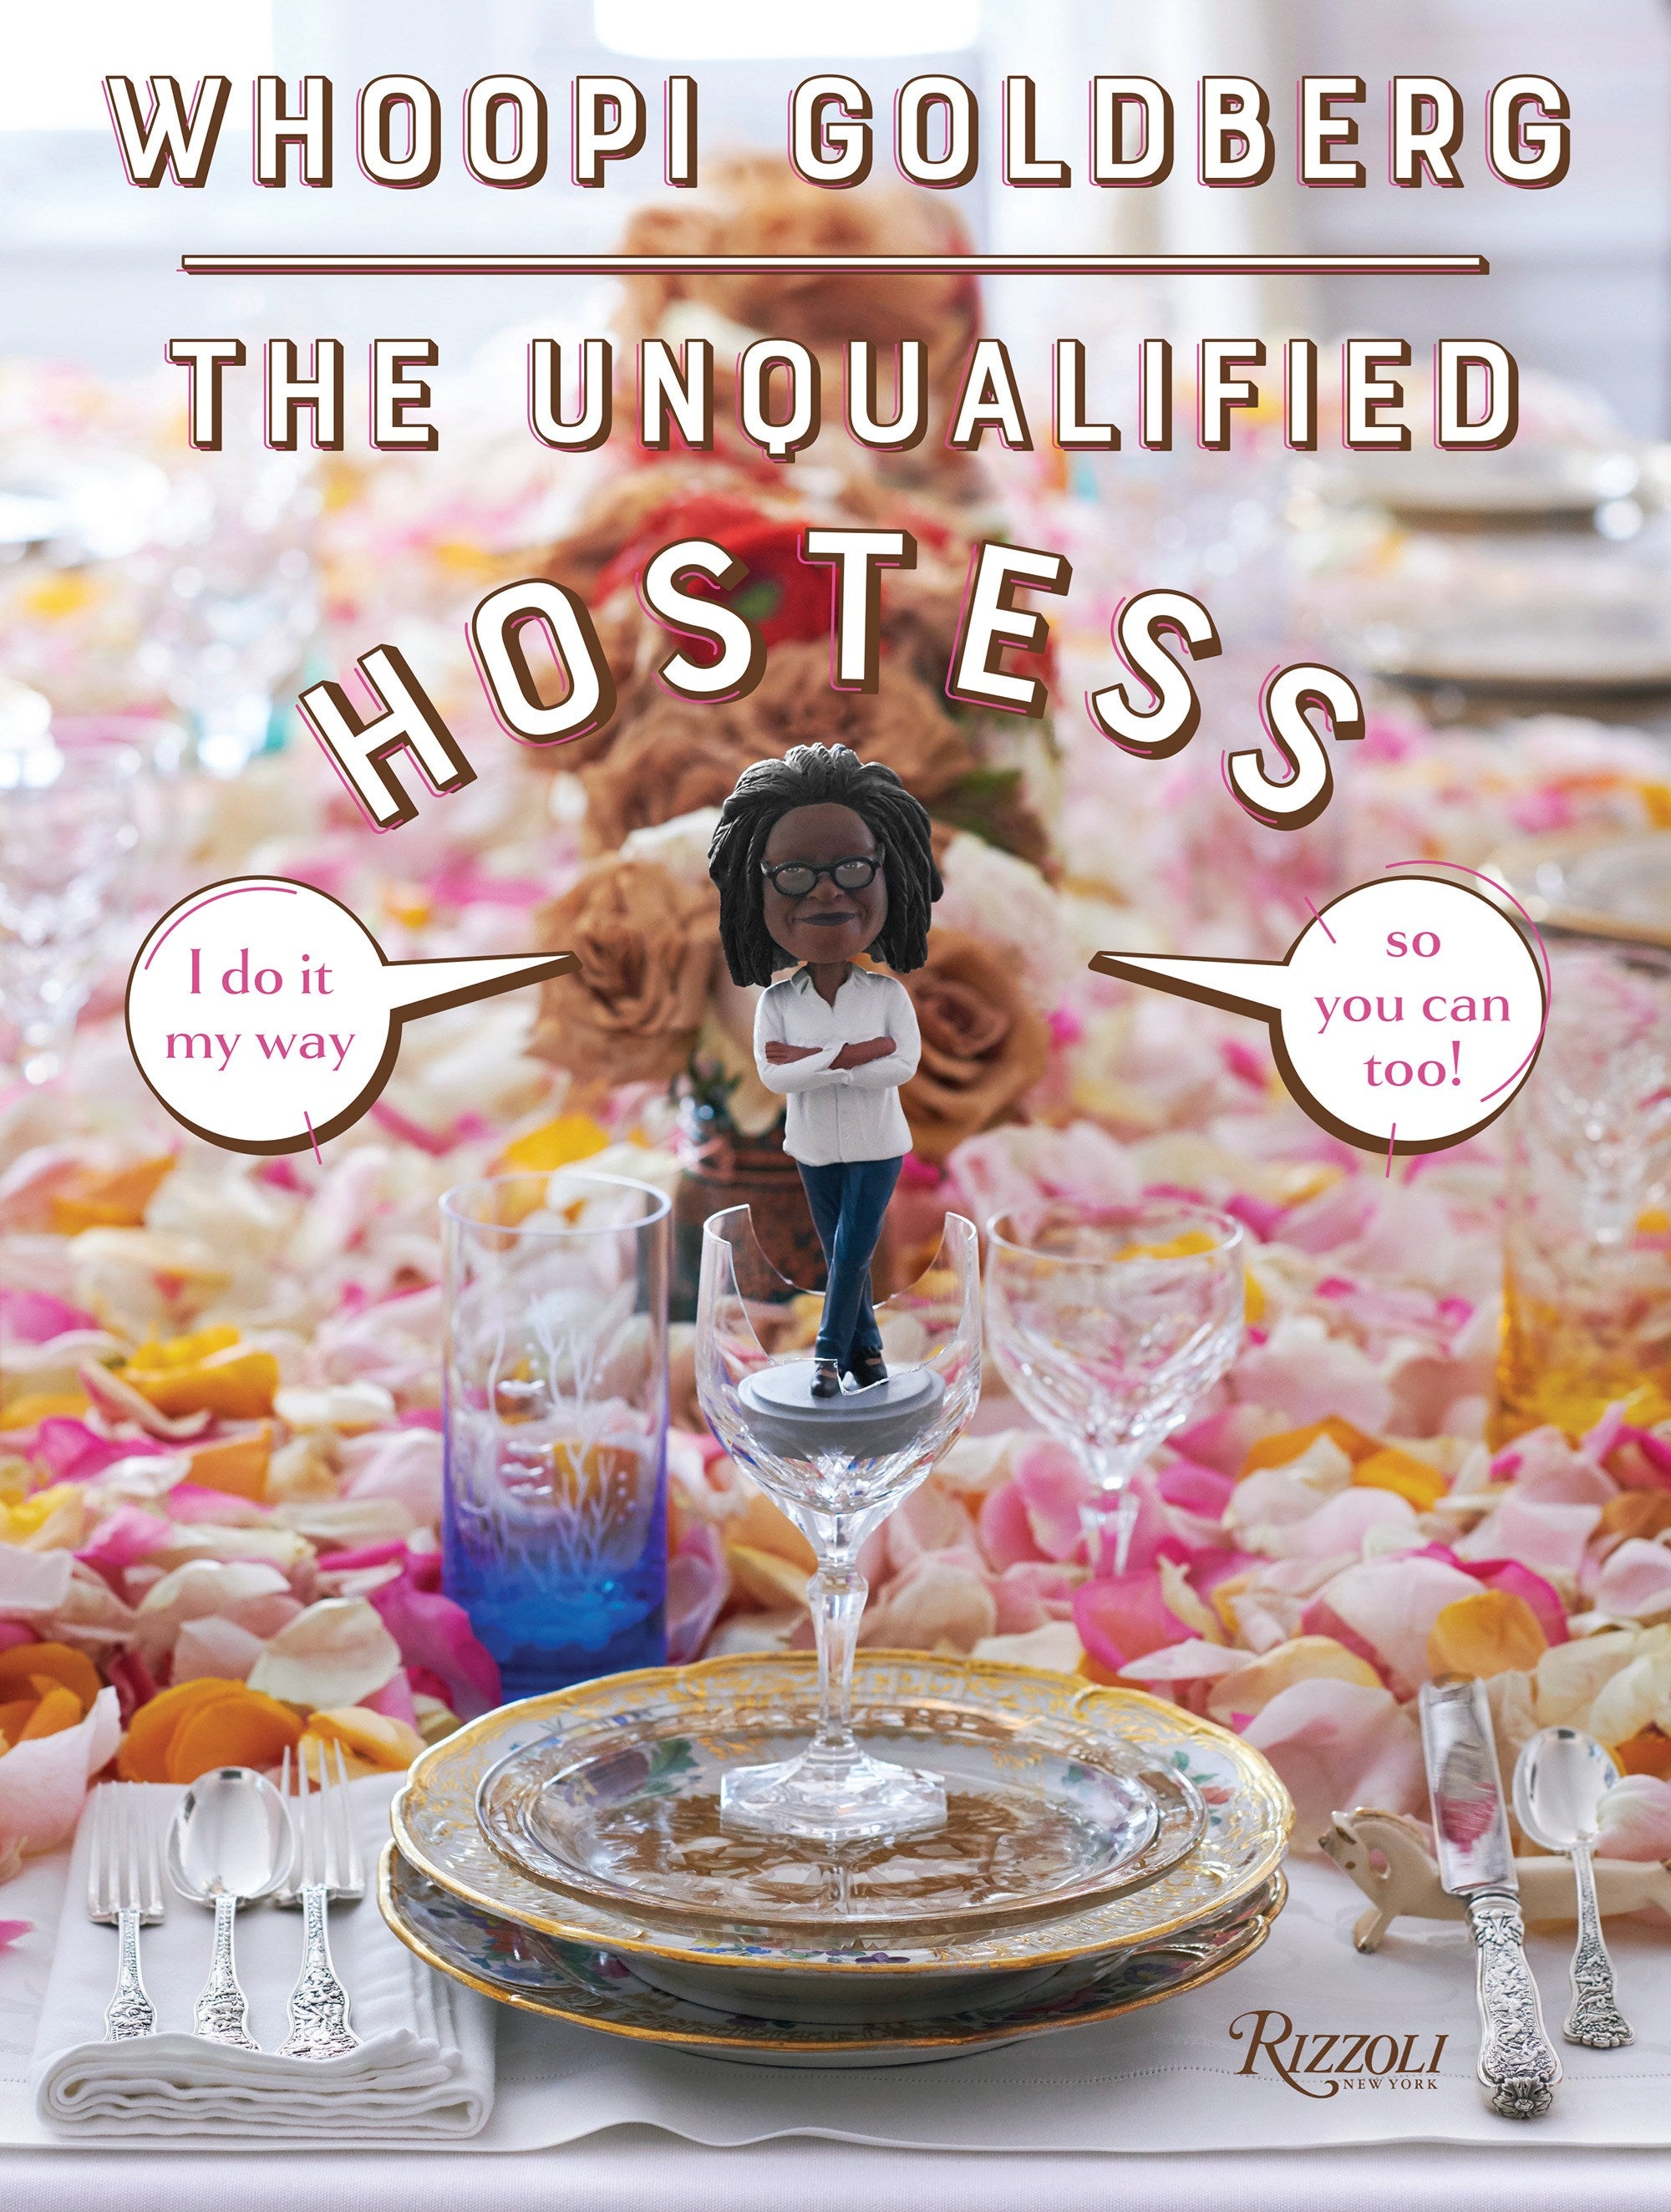 The Unqualified Hostess: I do it my way so you can too!